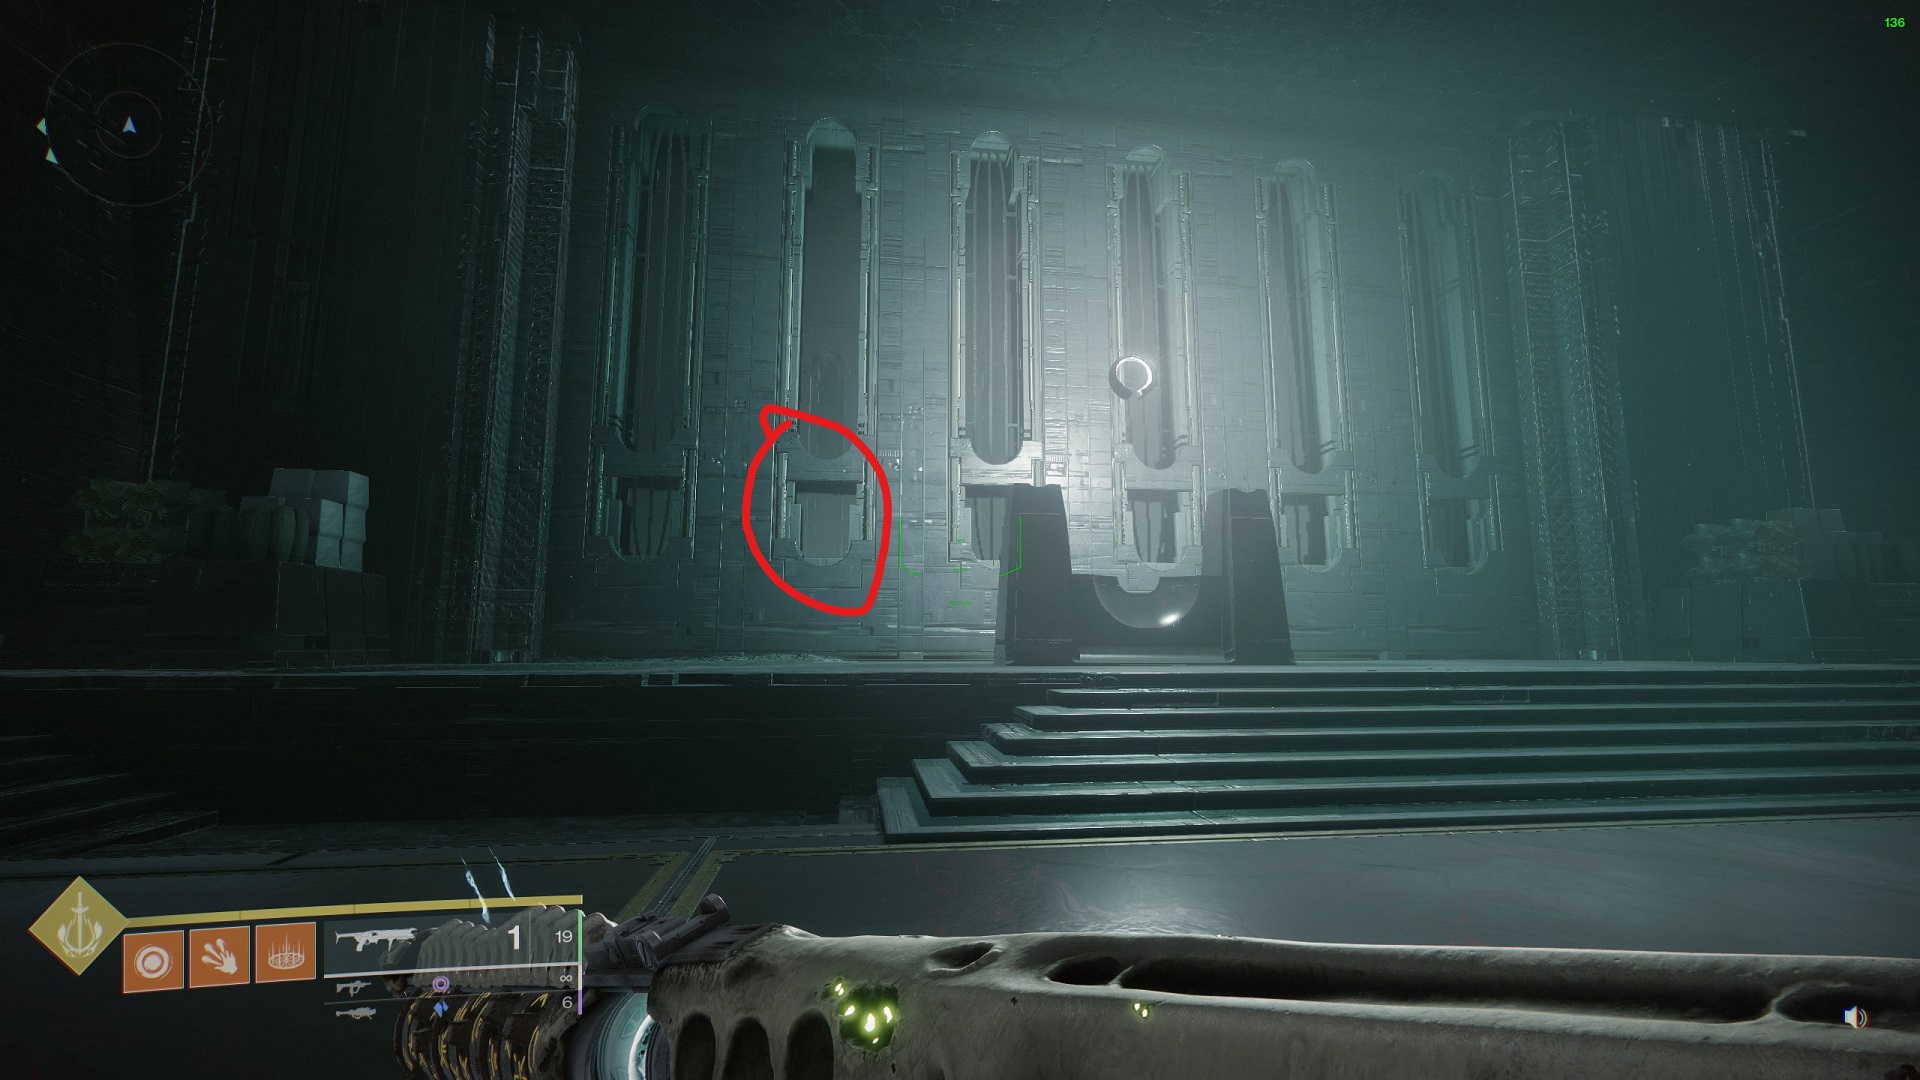 Destiny 2 - Shattered Suns Lore book Triumph - Location of Code Wall - 042B443